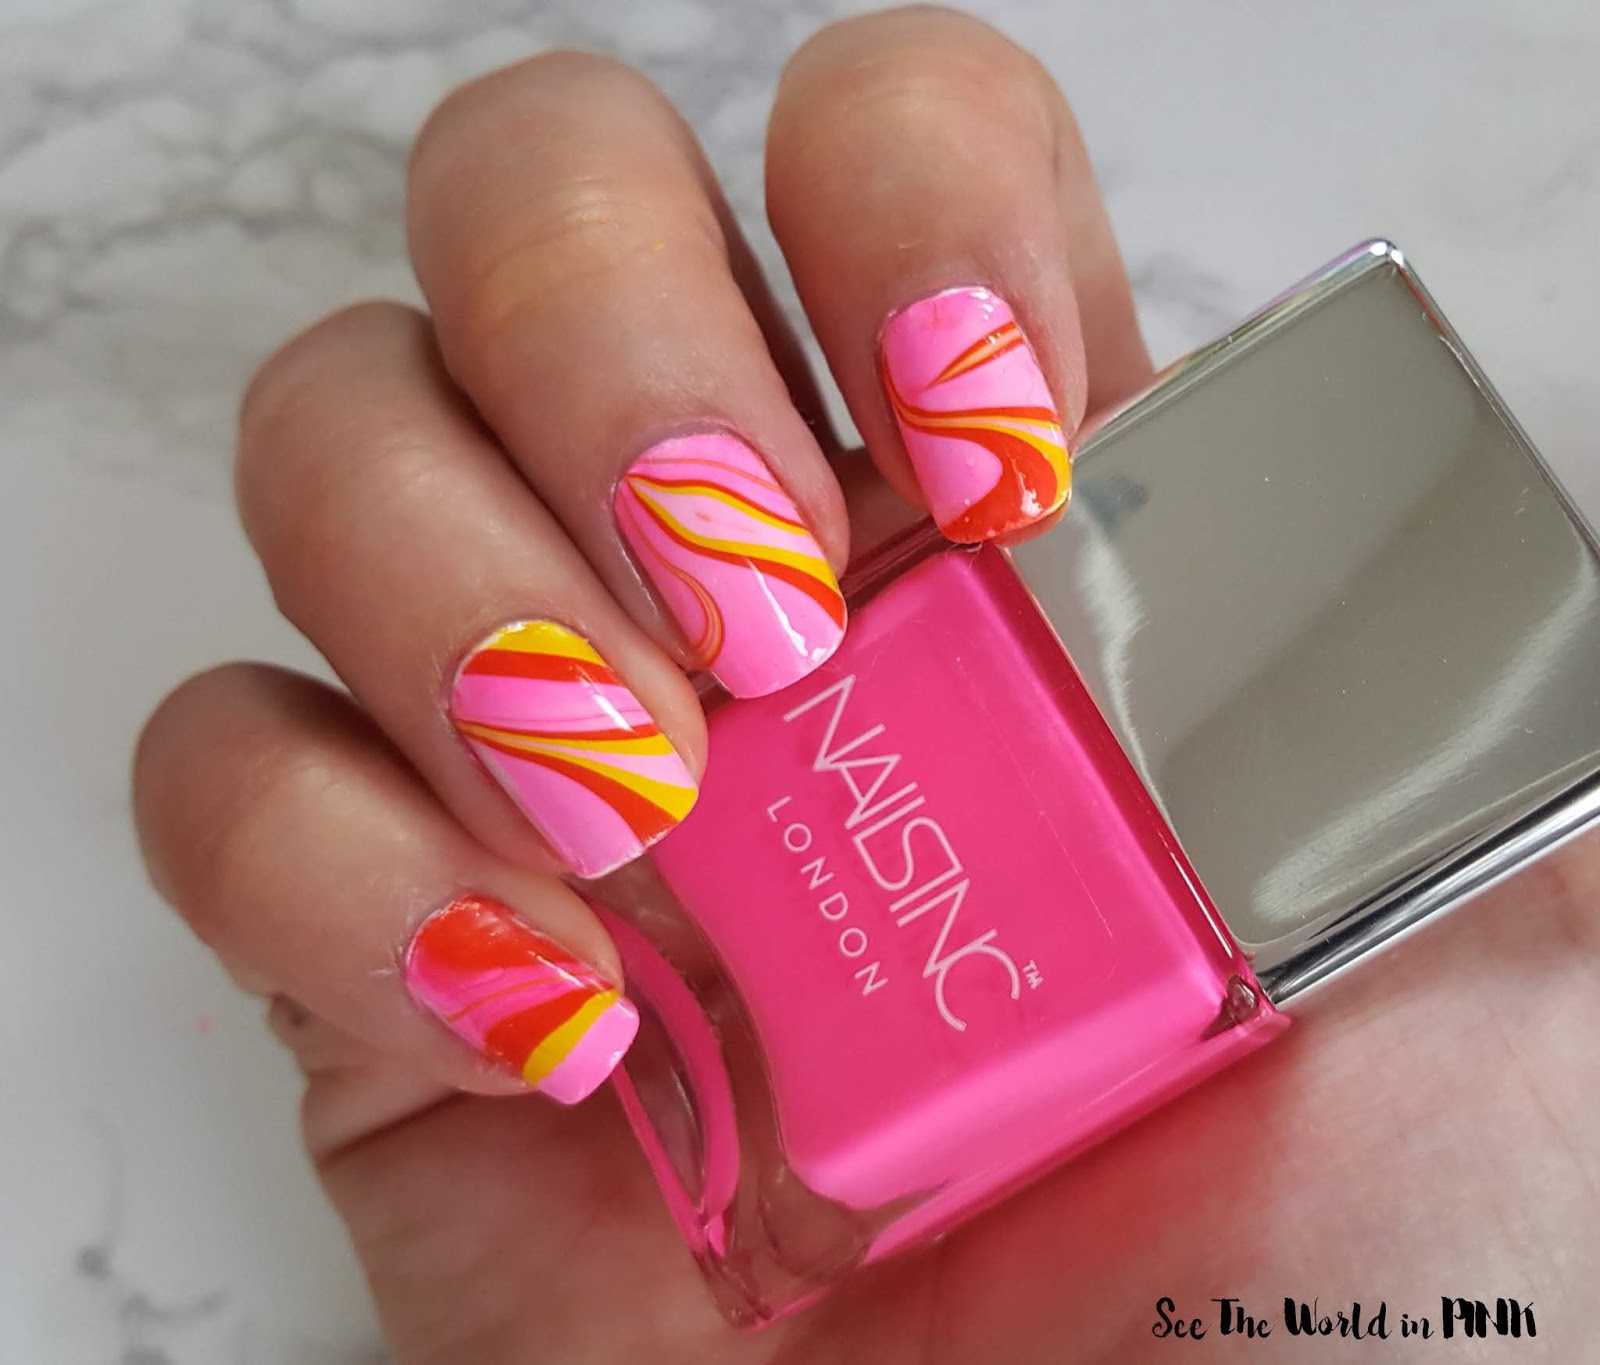 Manicure Monday - Neon Water Marble Nails! | See the World in PINK